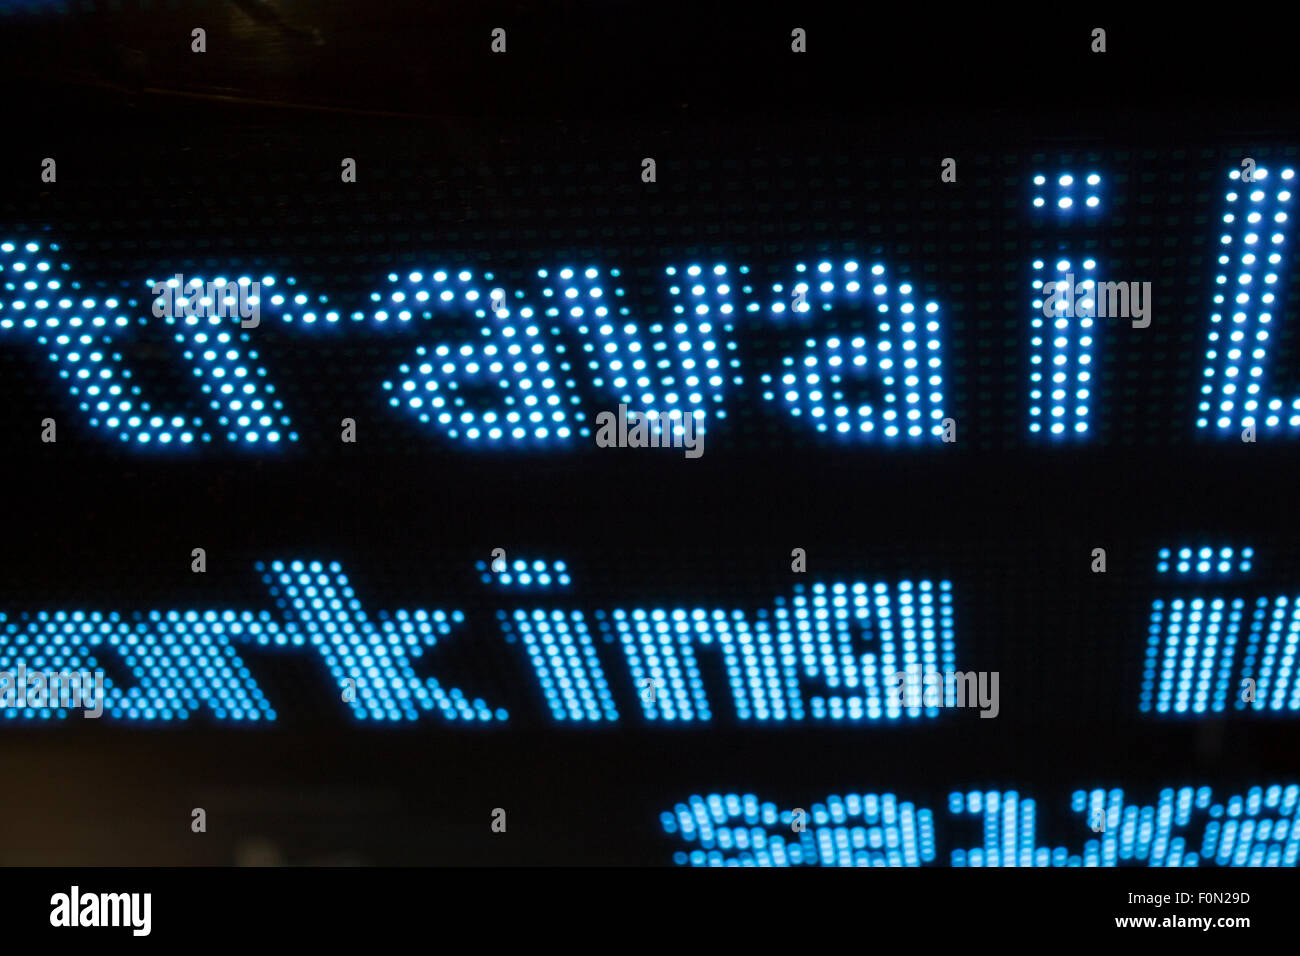 Led display with words travail and working with black background Stock Photo